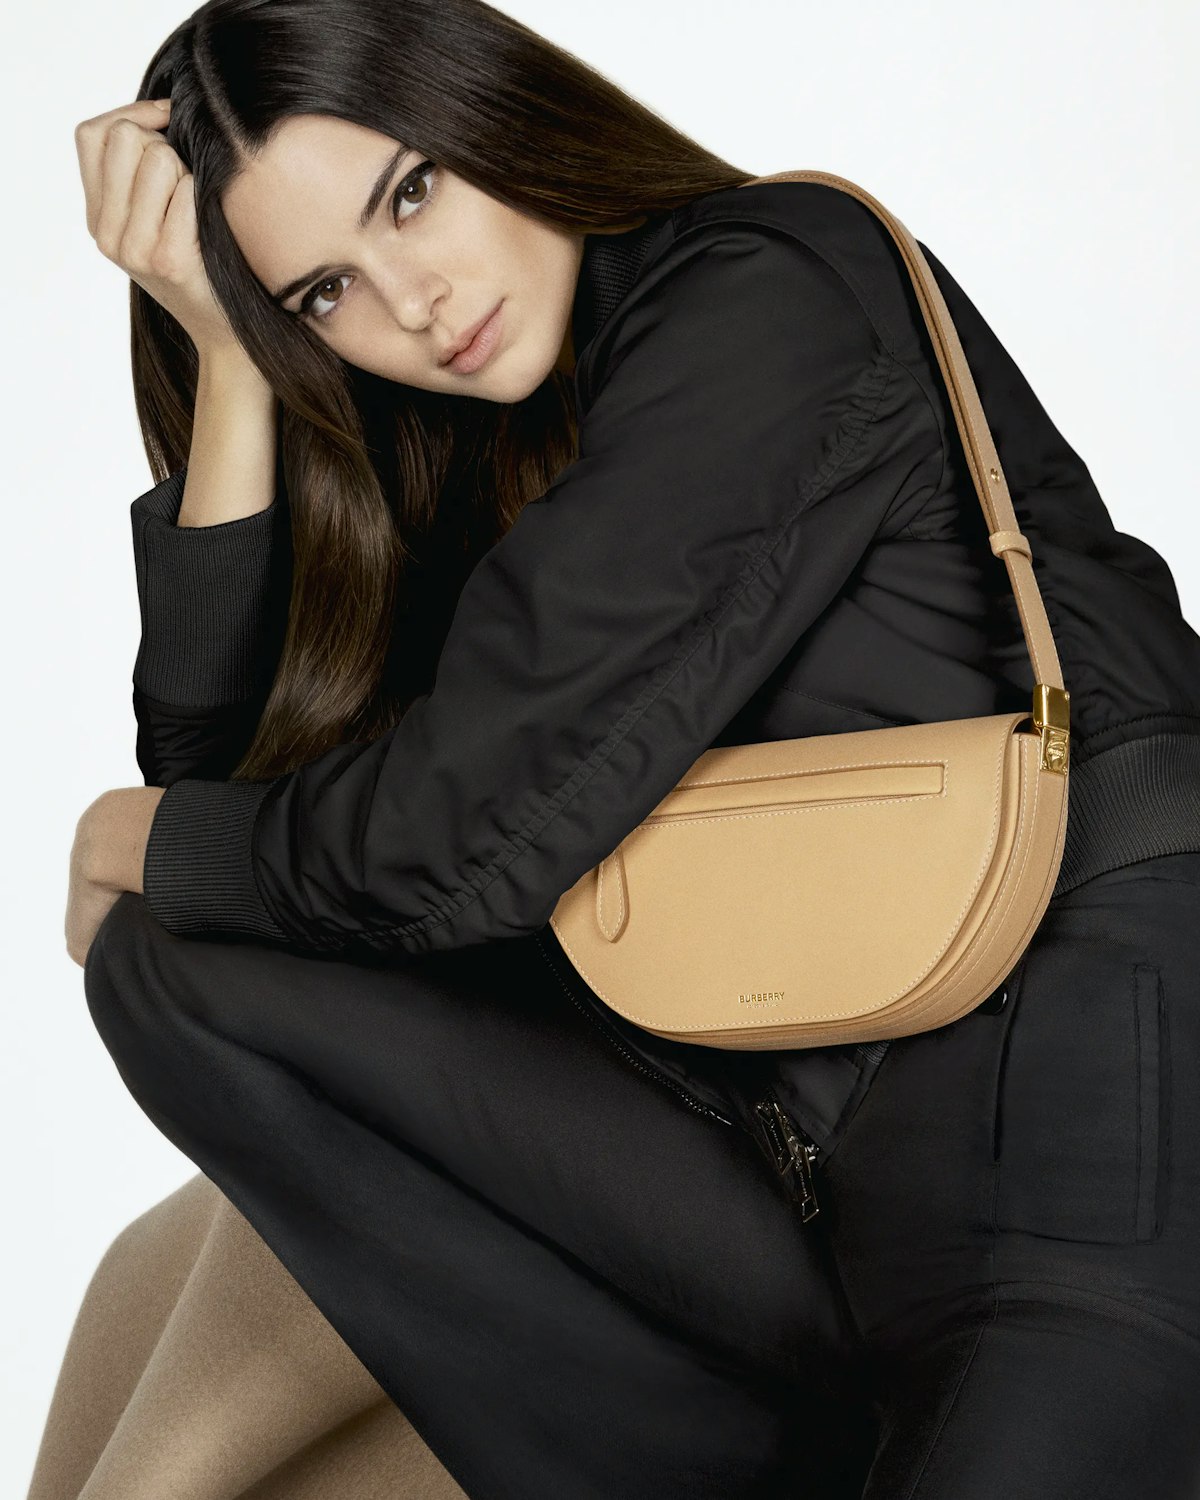 Kendall Jenner Puts a Grungy Twist on the Lady Bag